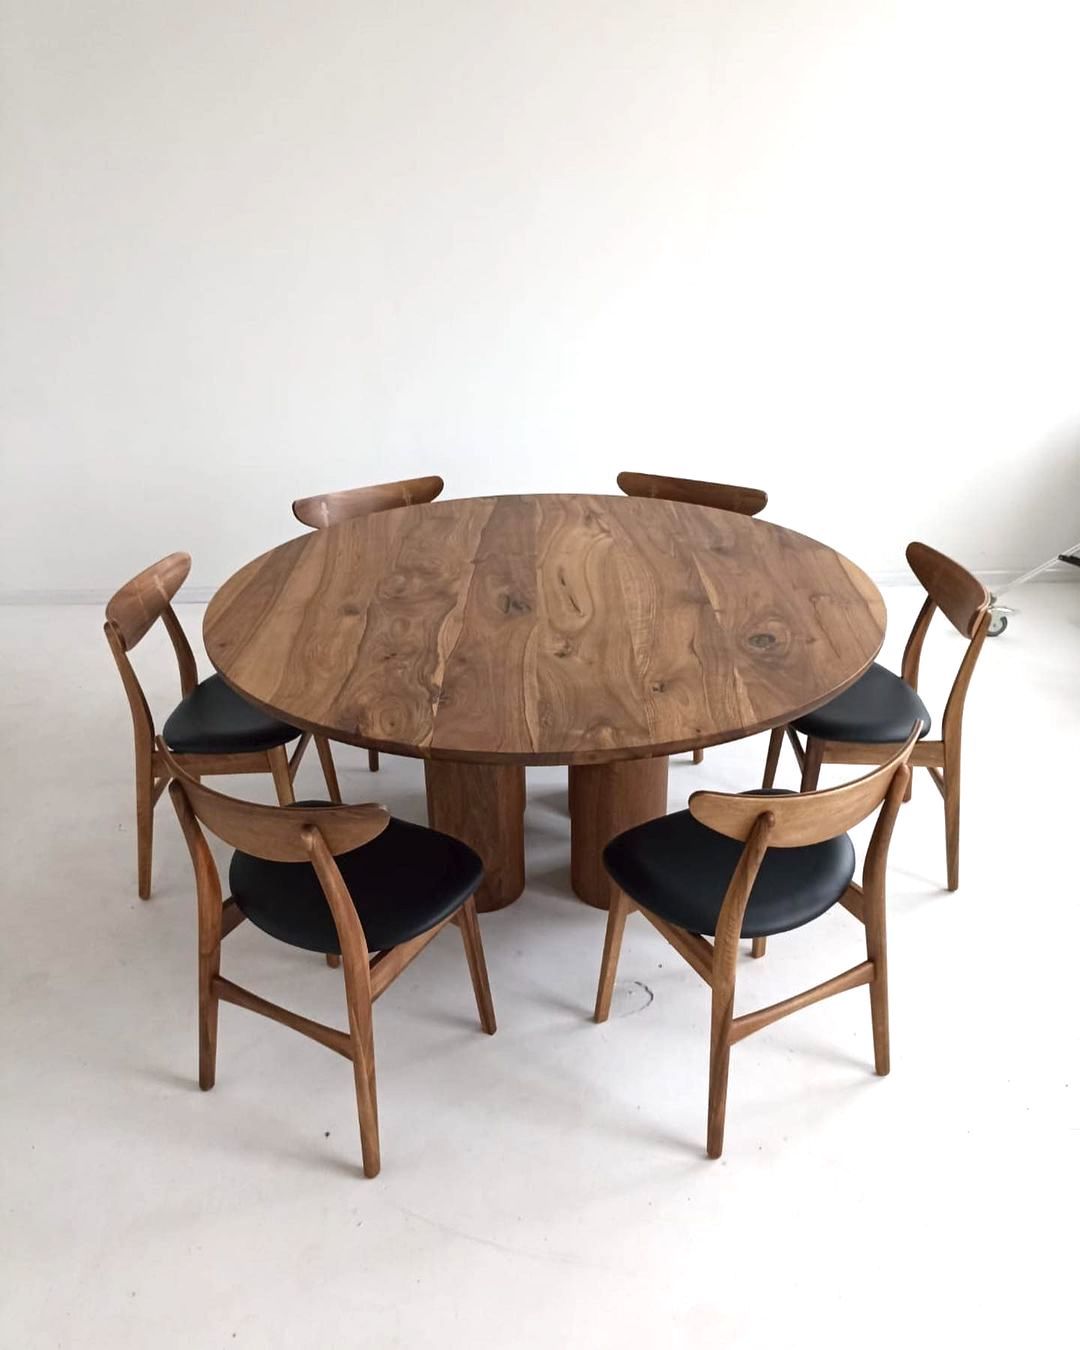 Elegance in Motion: The Charm of Circular Dining Tables